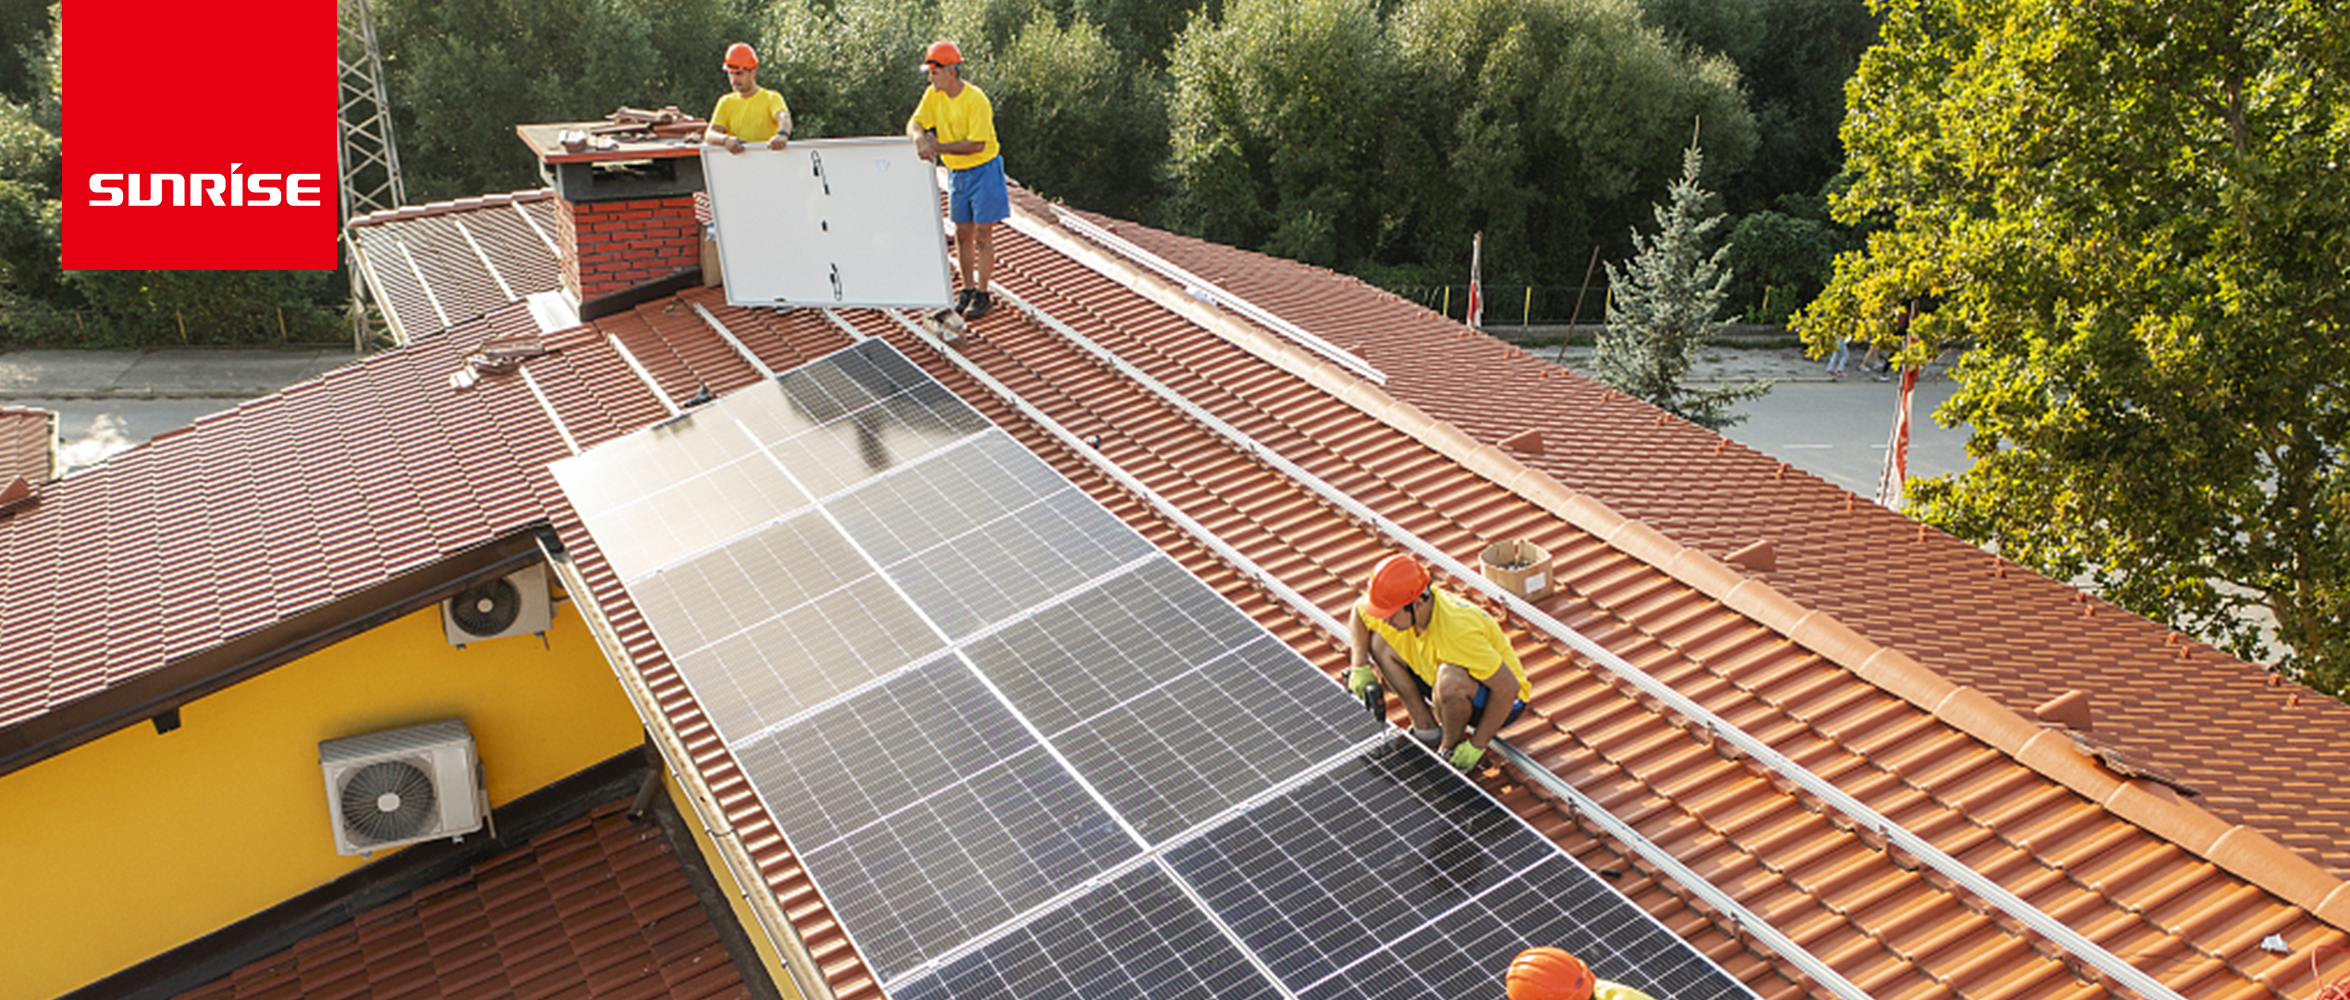 Market Prospects and Problems of Photovoltaic Rooftops